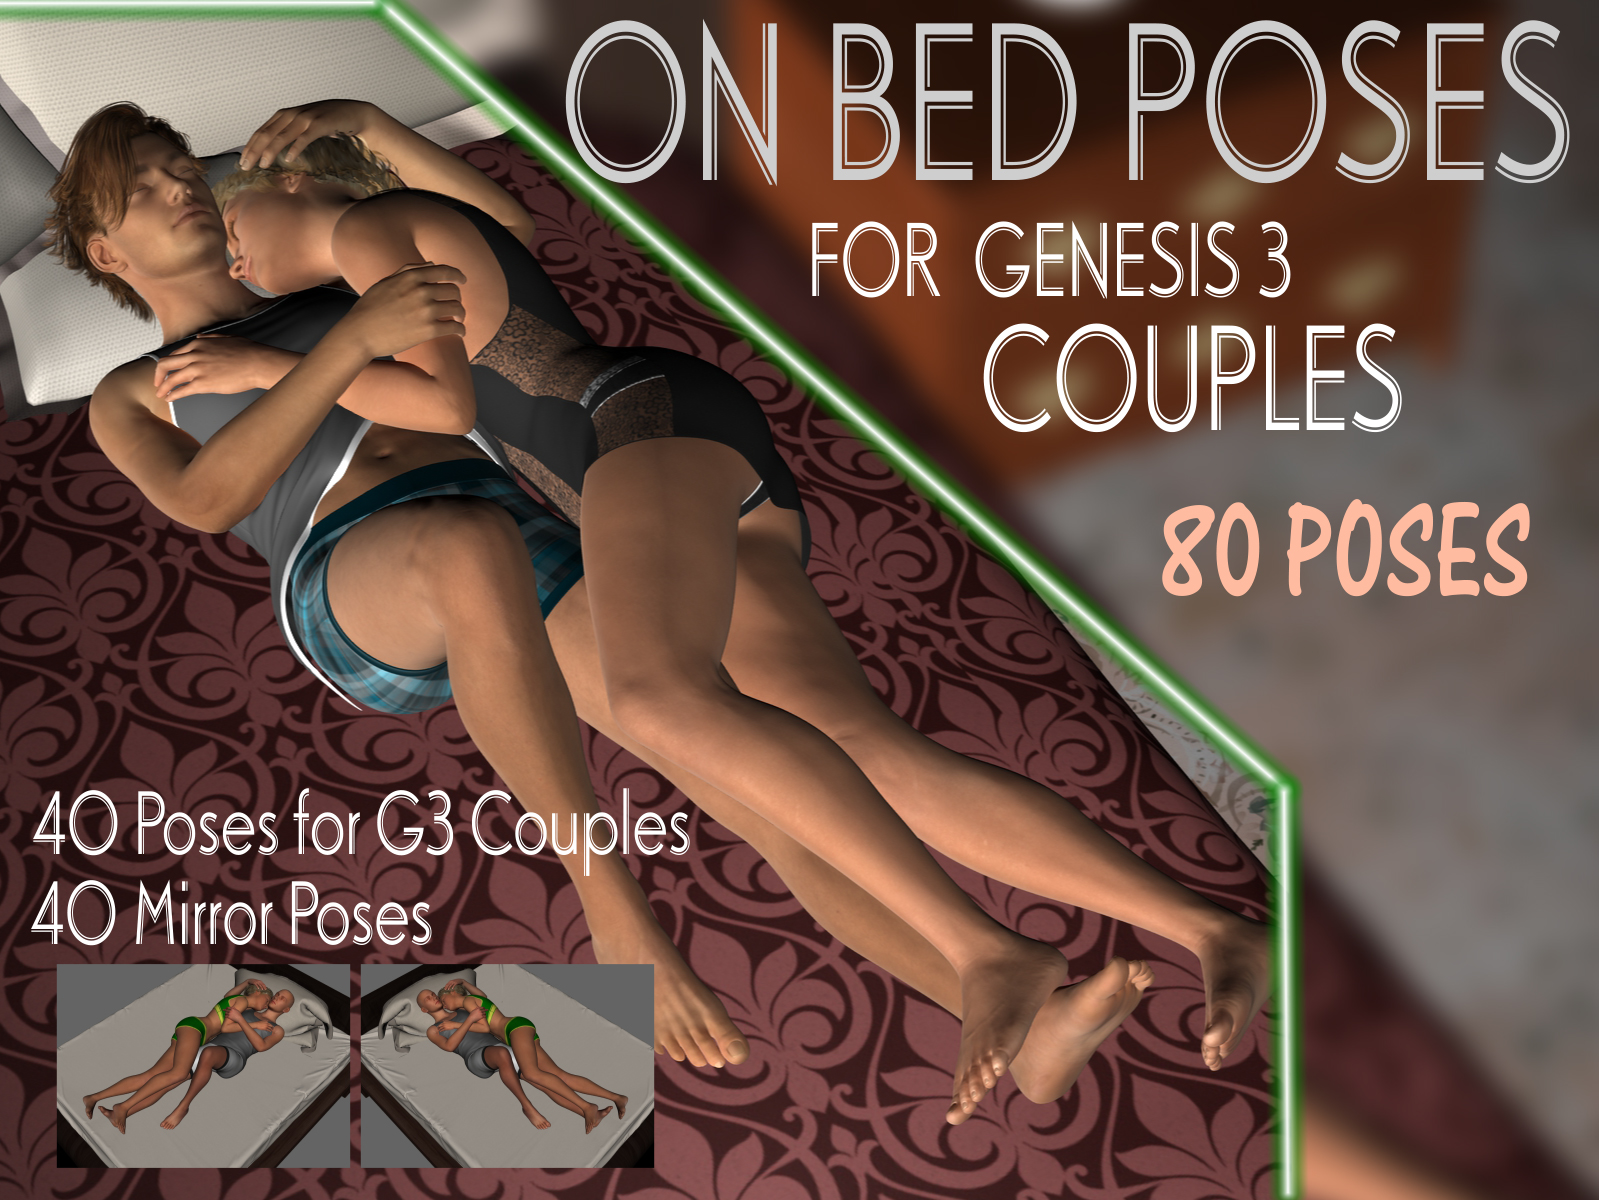 On Bed Poses for G3 Couples